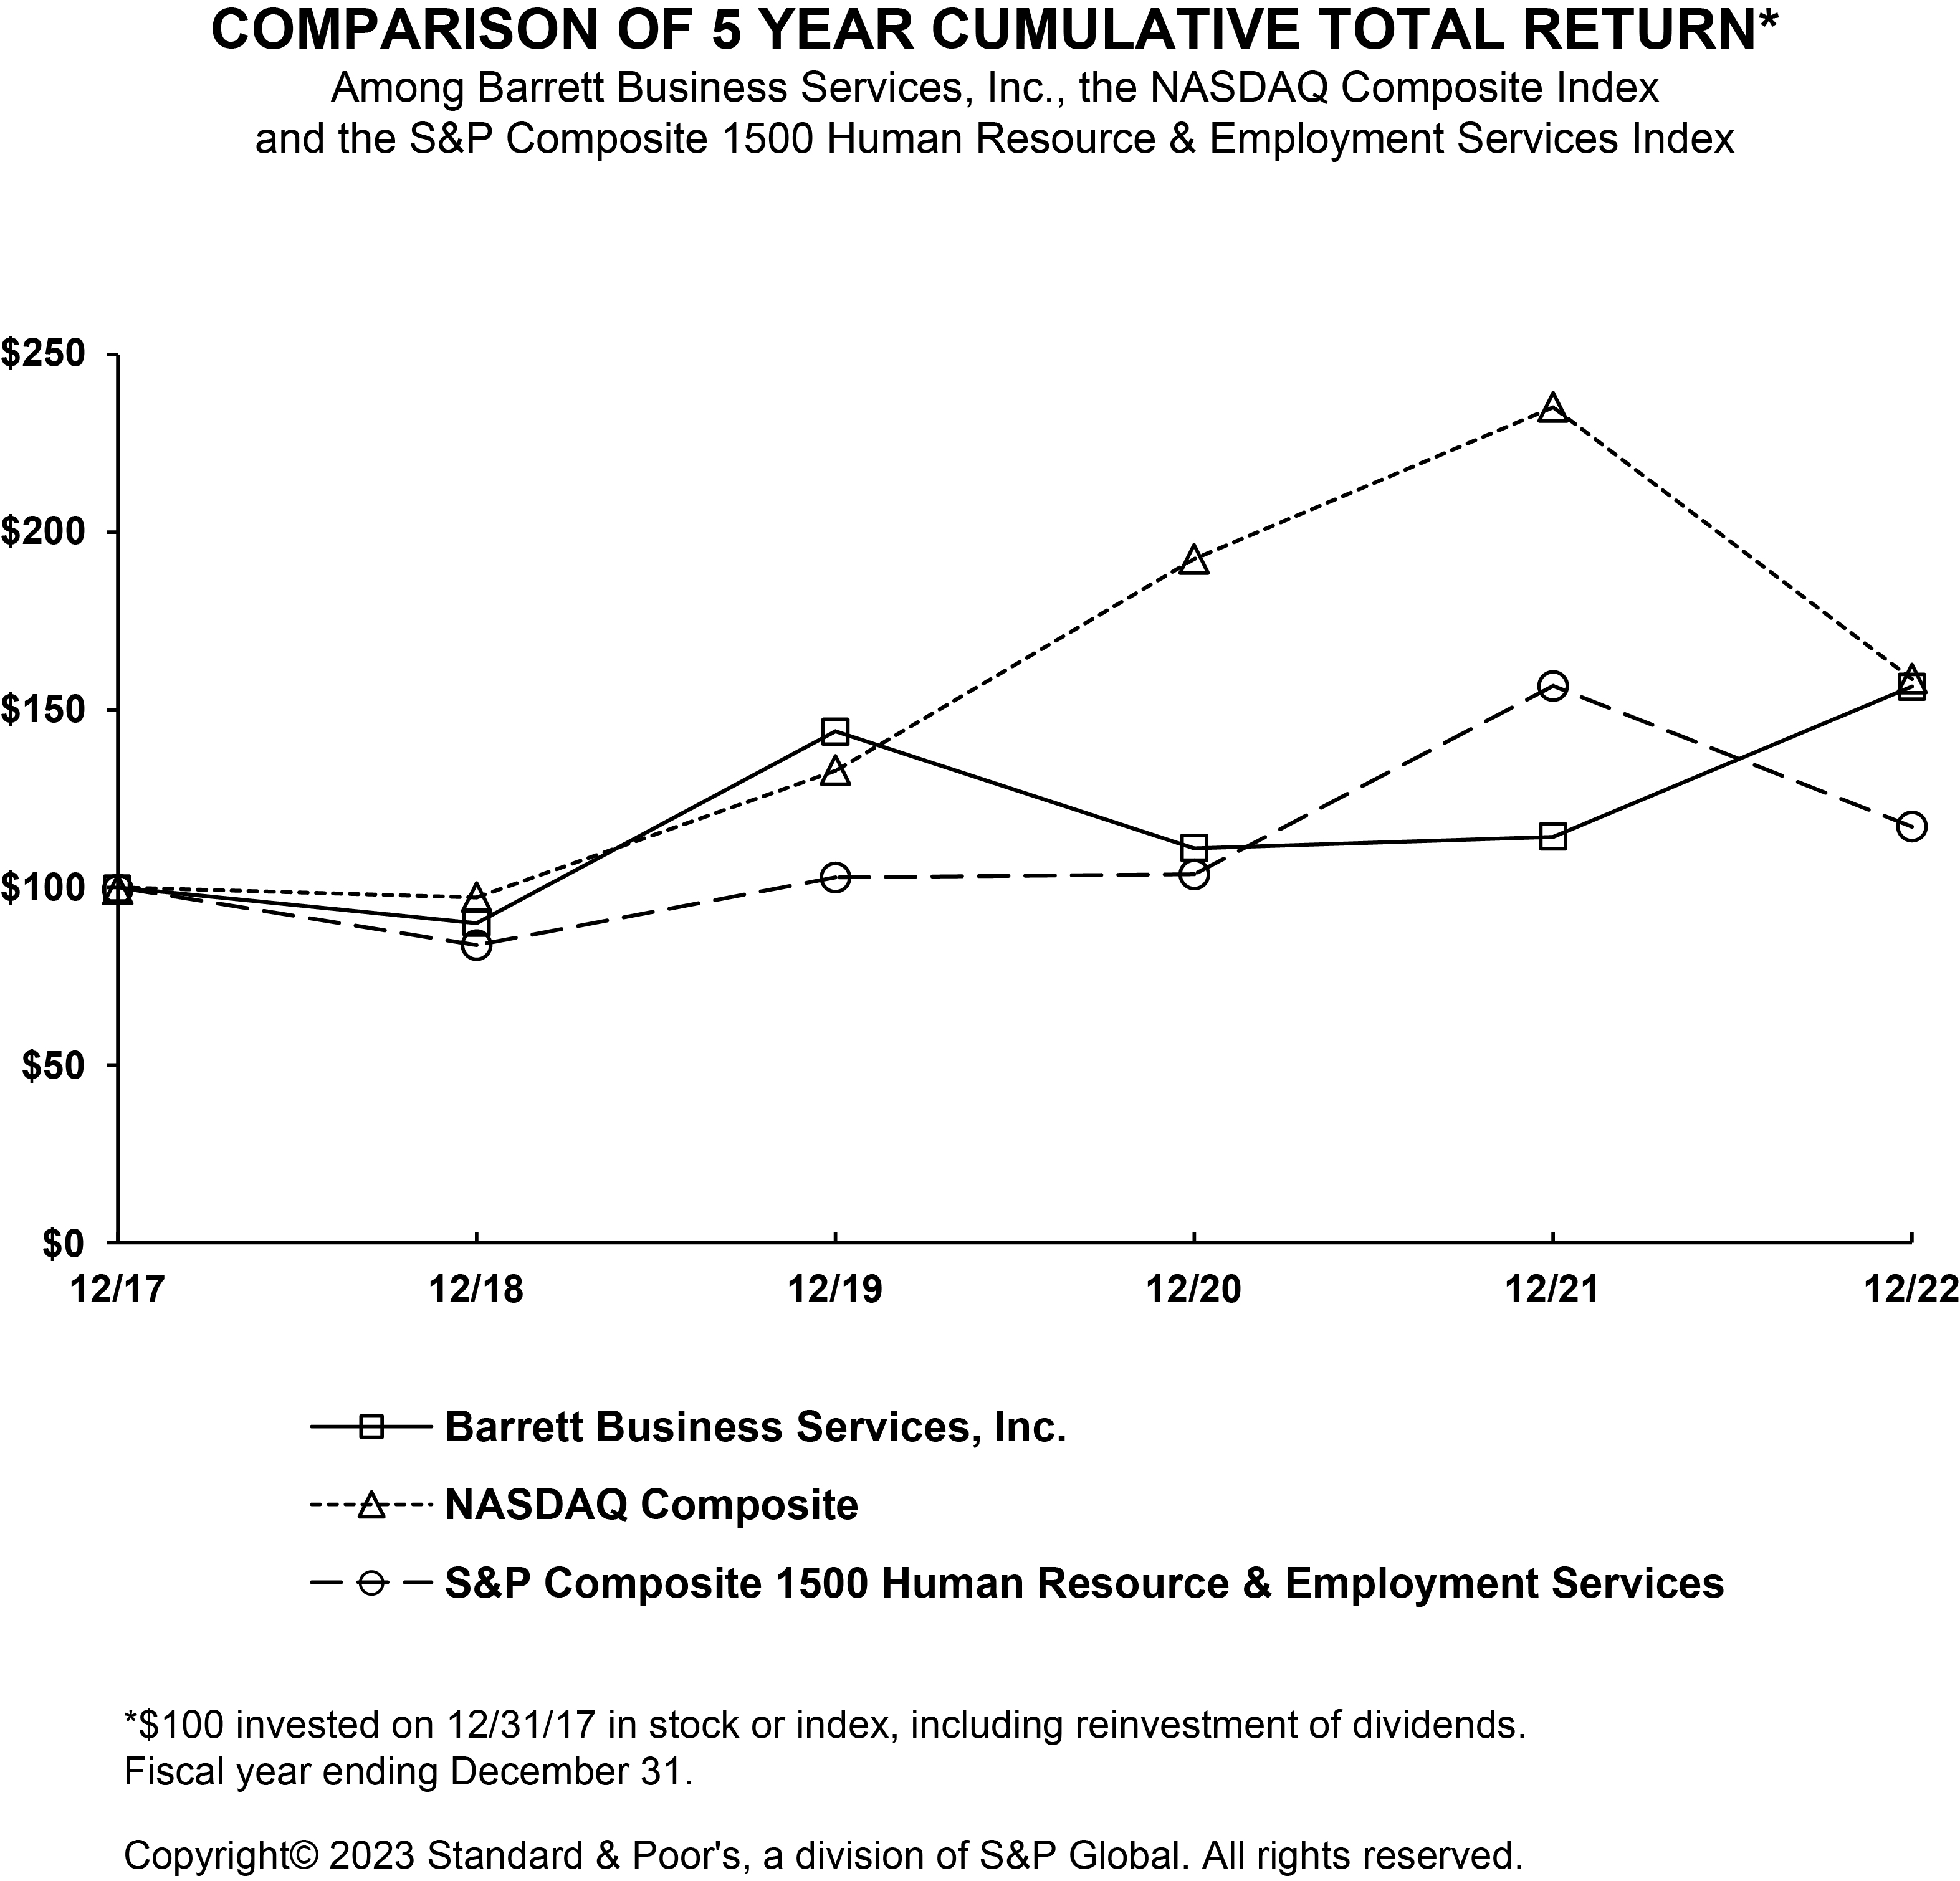 Line graph comparing the cumulative total return of a $100 investment in our common stock with the cumulative total return of the same investment in the NASDAQ Composite Index and the S&P Composite 1500 Human Resource & Employment Services Index for years between 2017 and 2022.
         Barrett Business Services, Inc.: 2017: $100.00, 2018: $89.91, 2019: $143.94, 2020: $110.98, 2021: $114.20, 2022: $156.54,
         NASDAQ Composite: 2017: $100.00, 2018: $97.16, 2019: $132.81, 2020: $192.47, 2021: $235.15, 2022: $158.65,
         S&P Composite 1500 Human Resource & Employment Services: 2017: $100.00, 2018: $83.73, 2019: $102.81, 2020: $103.69, 2021: $156.71, 2022: $117.07